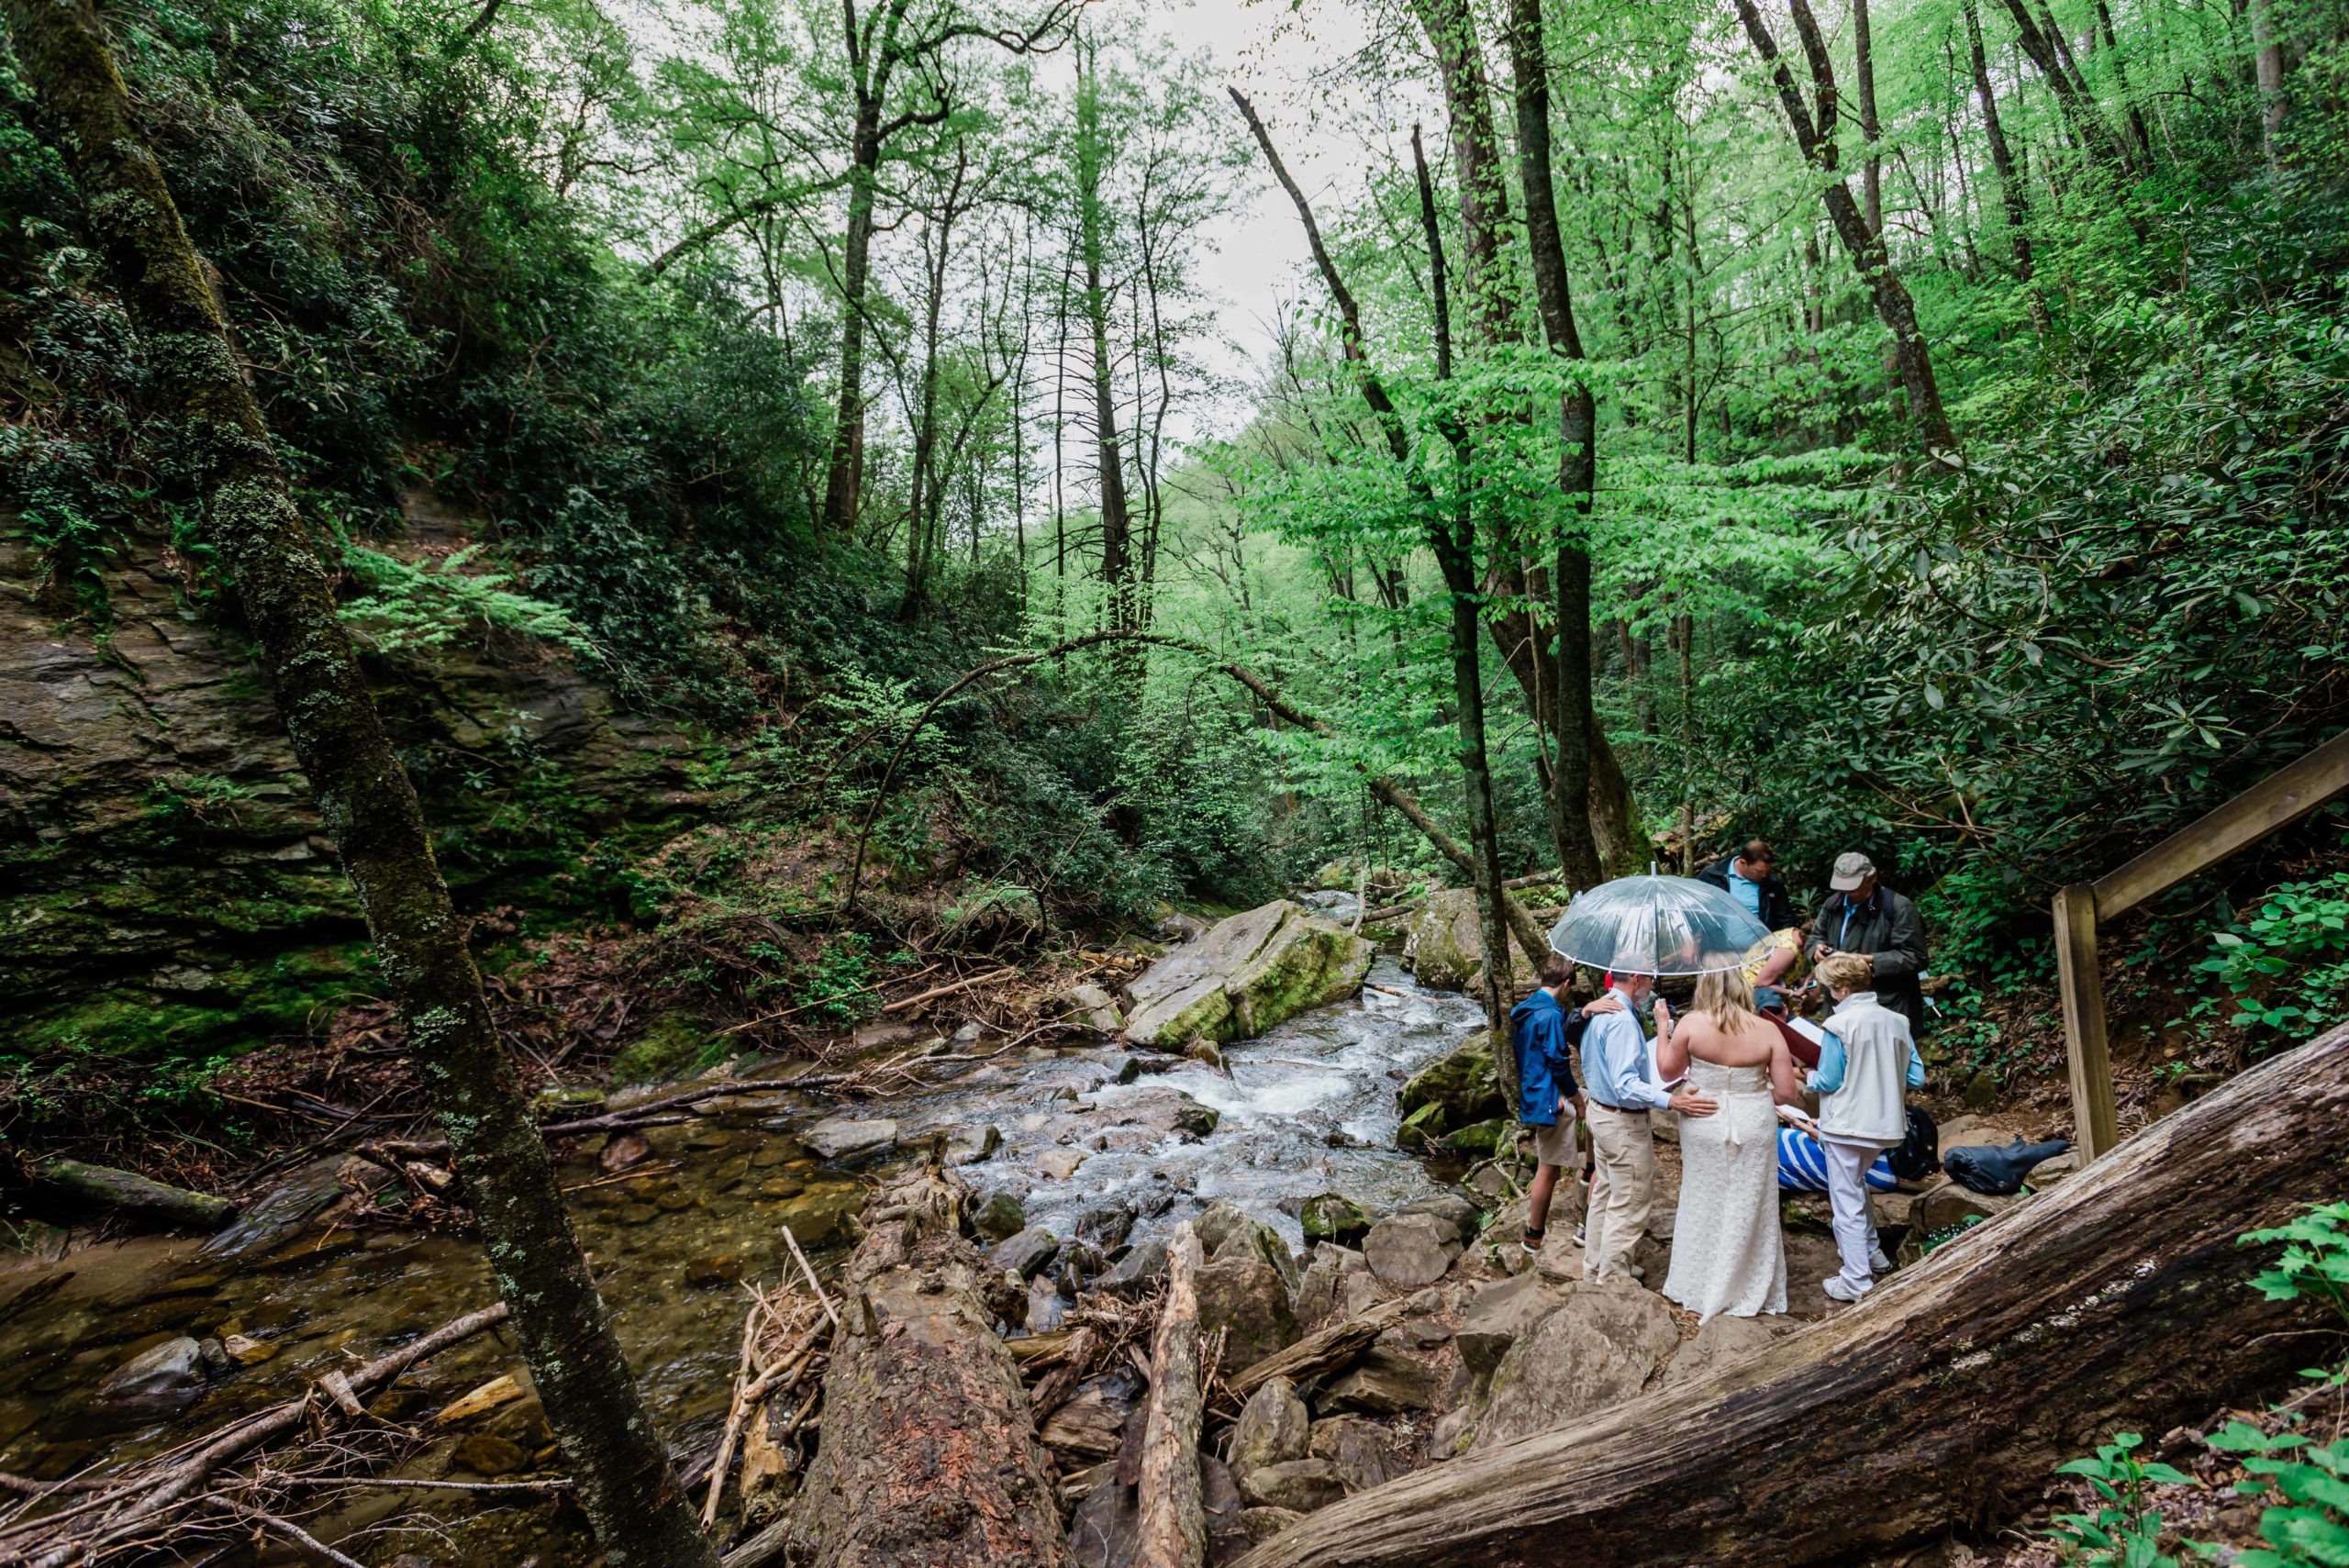 A couple and their family take part in an adventure elopement ceremony in a forest hollow overlooking a rock filled stream that feeds from the rushing waterfall that is just outside of the frame. The bride, groom and their families stands in a tight circle as they read elopement vows and the officiant performs the ceremony.